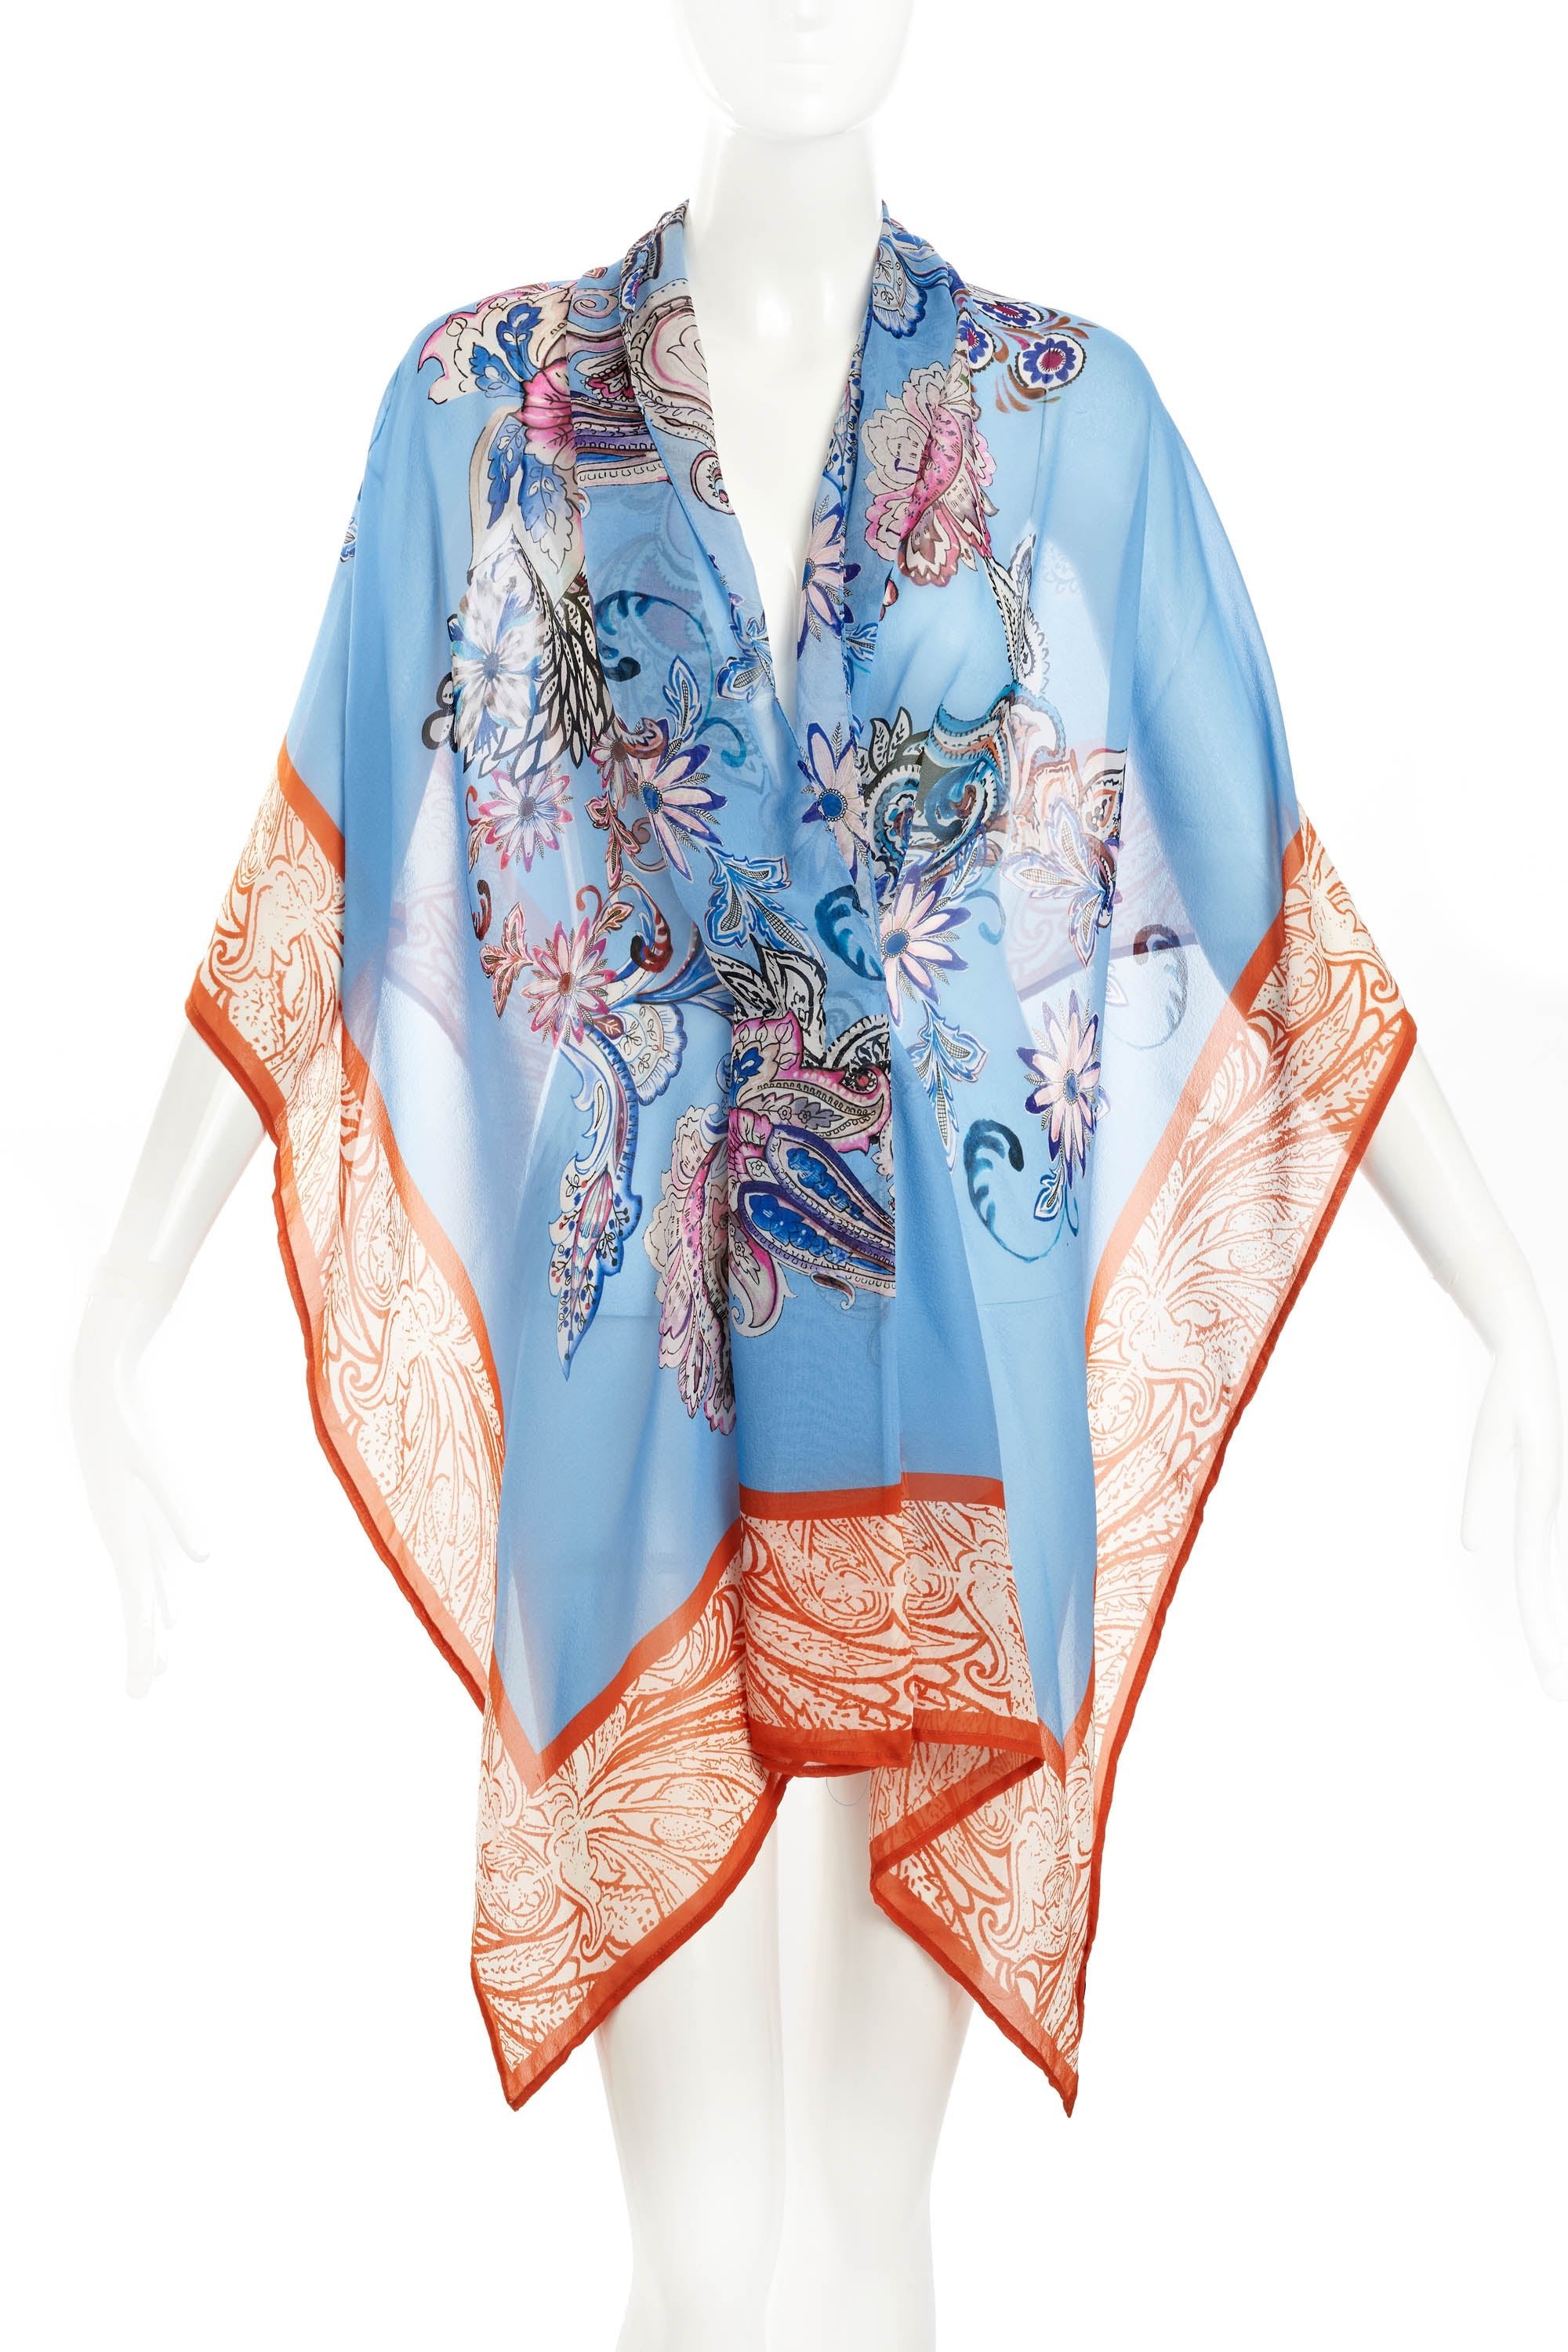 Etro Blue and Orange Floral Scarf - Foxy Couture Carmel